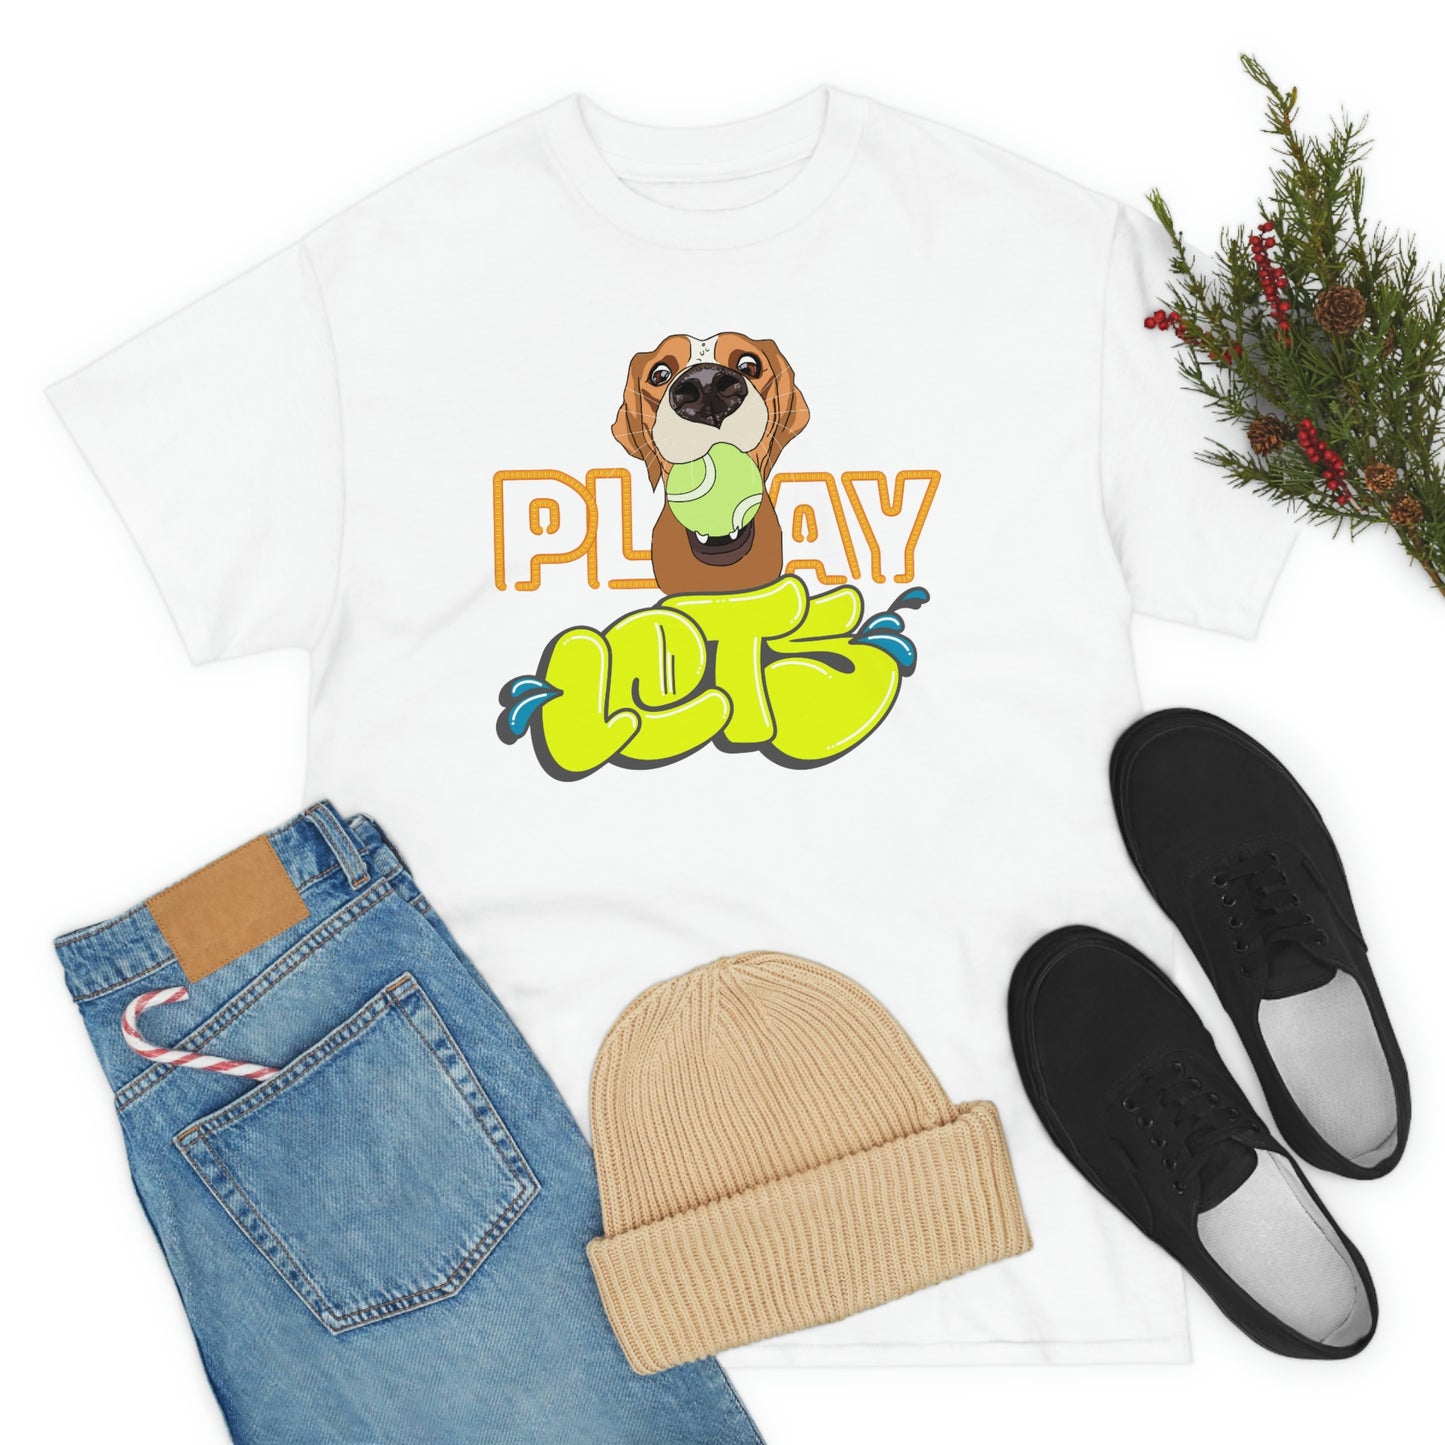 "Let's Play" Adorable Dog with Ball design white Cotton Tee